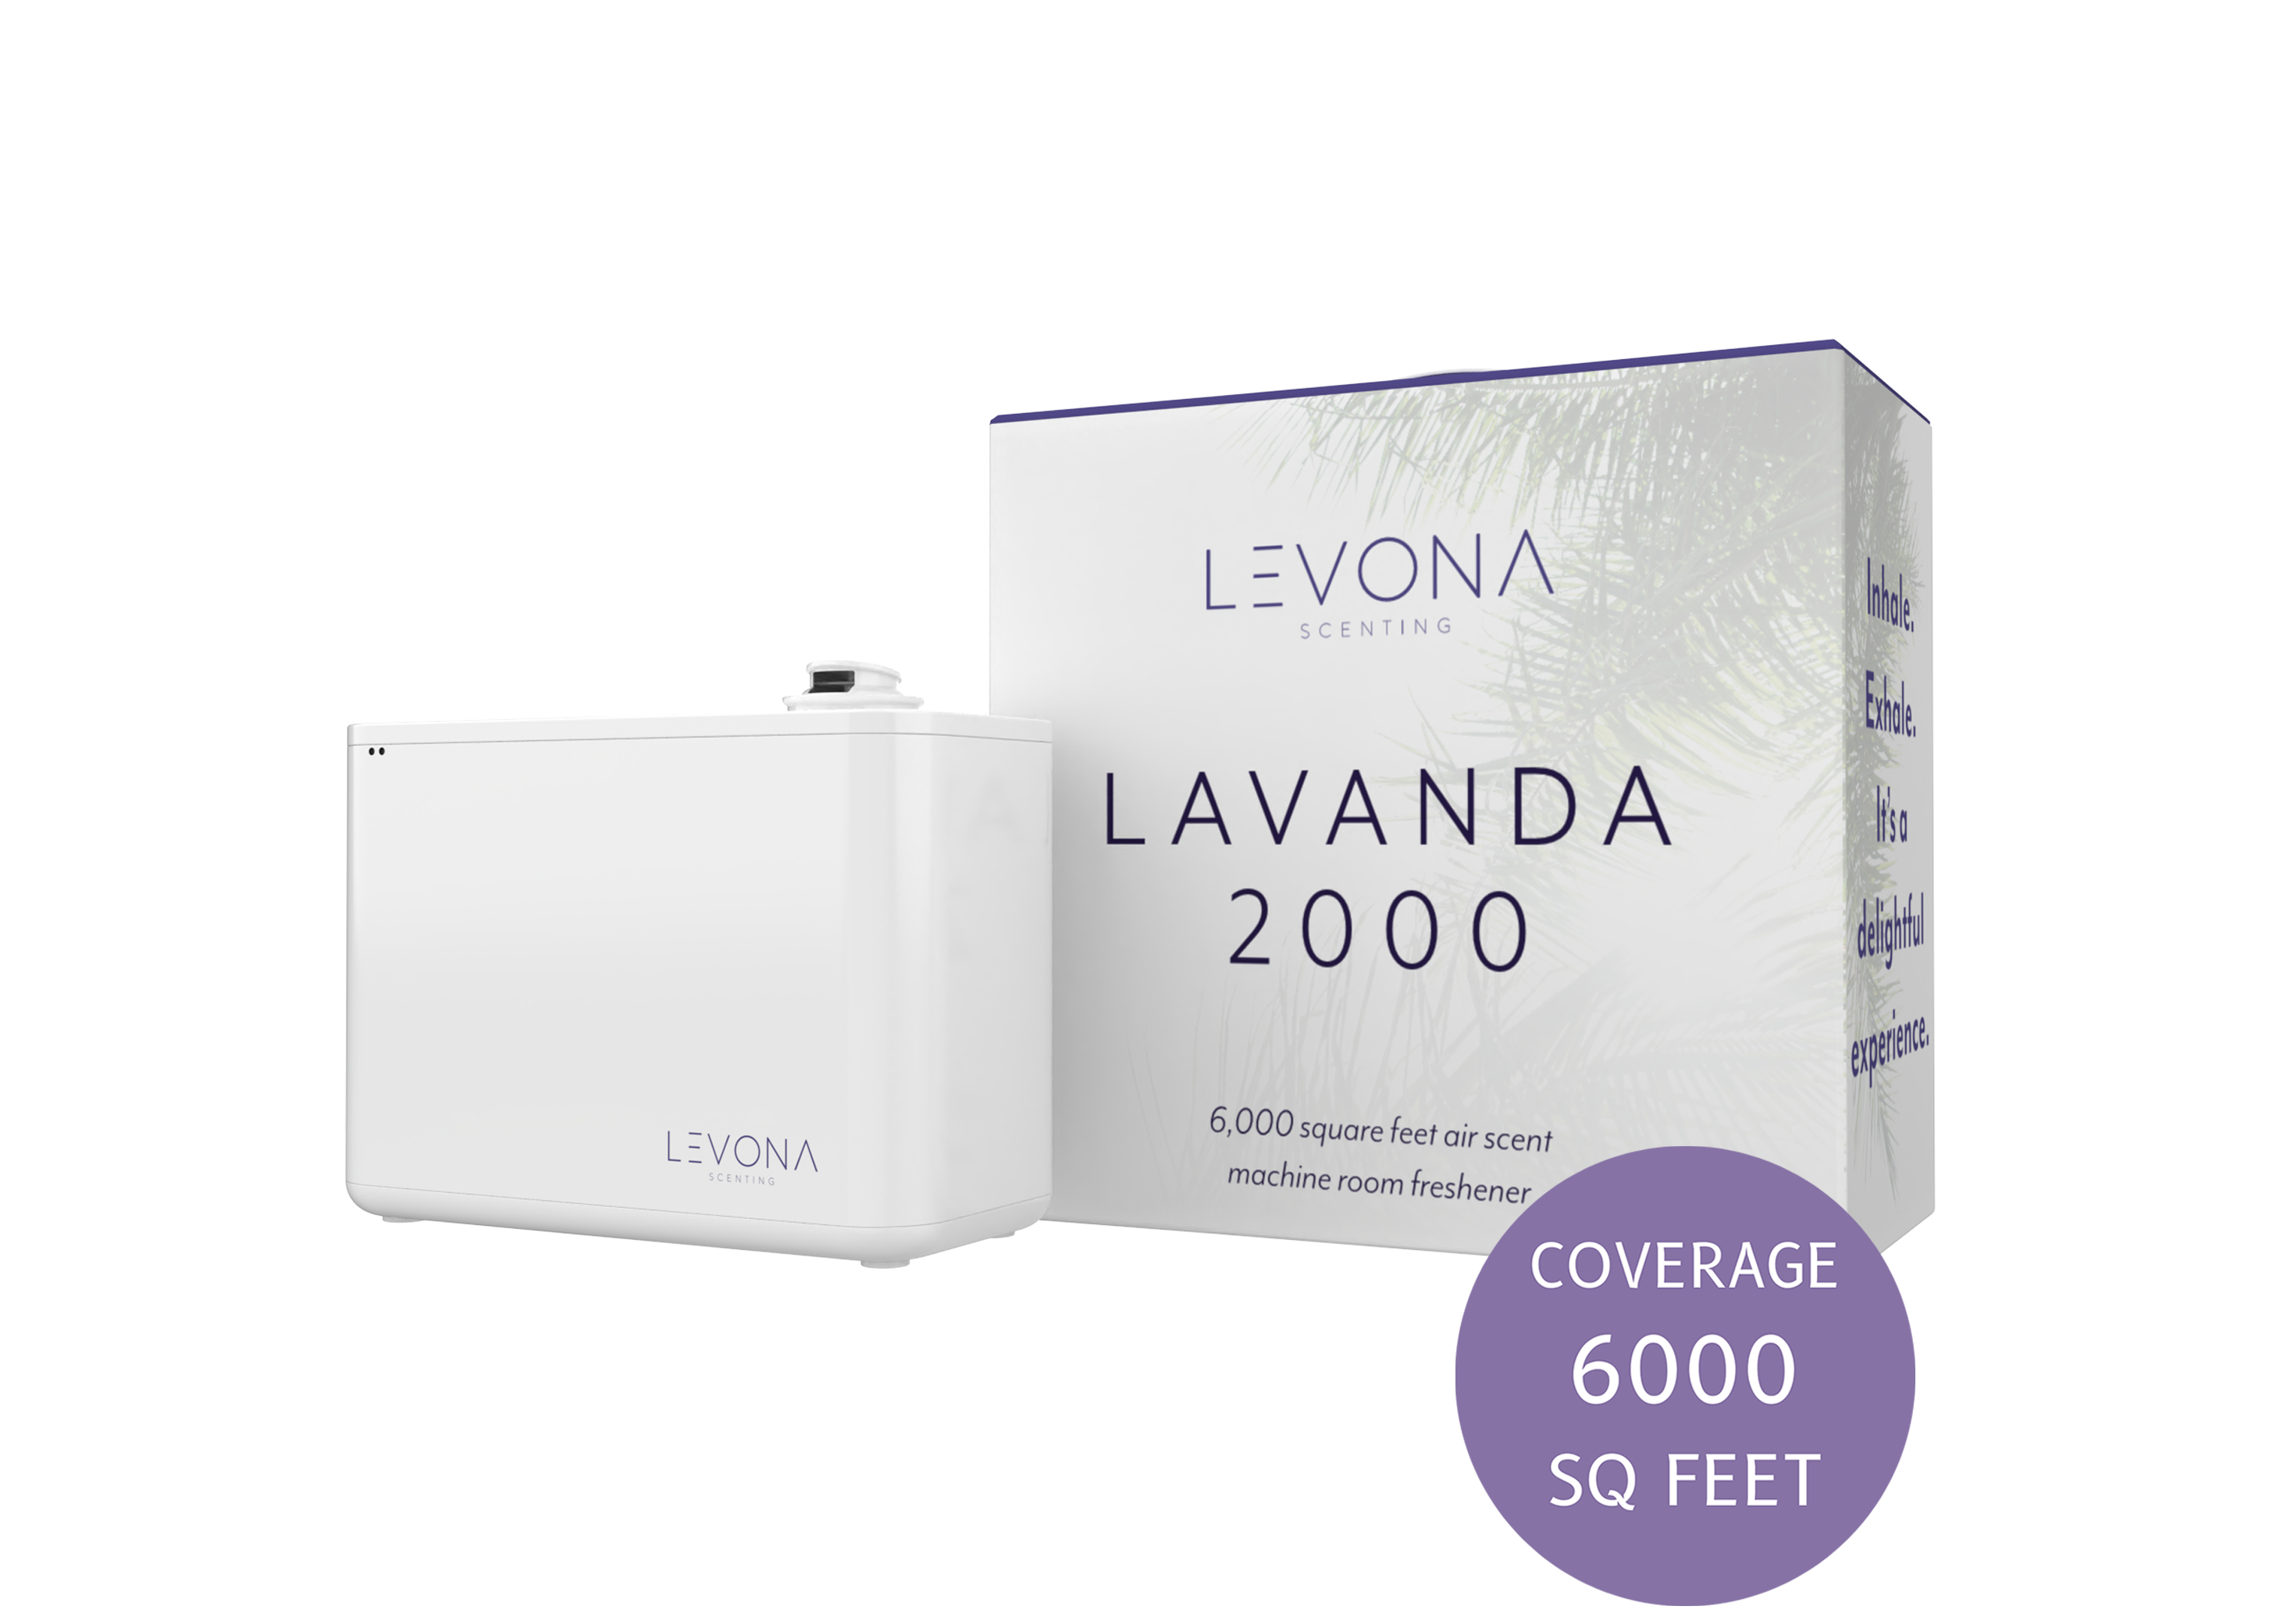 Levona Scents Pure Essential Oils for Diffusers for Home Luxury Scents -  Restful Lavender Essential Oil is A Floral Blend of Eucalyptus, Bergamot